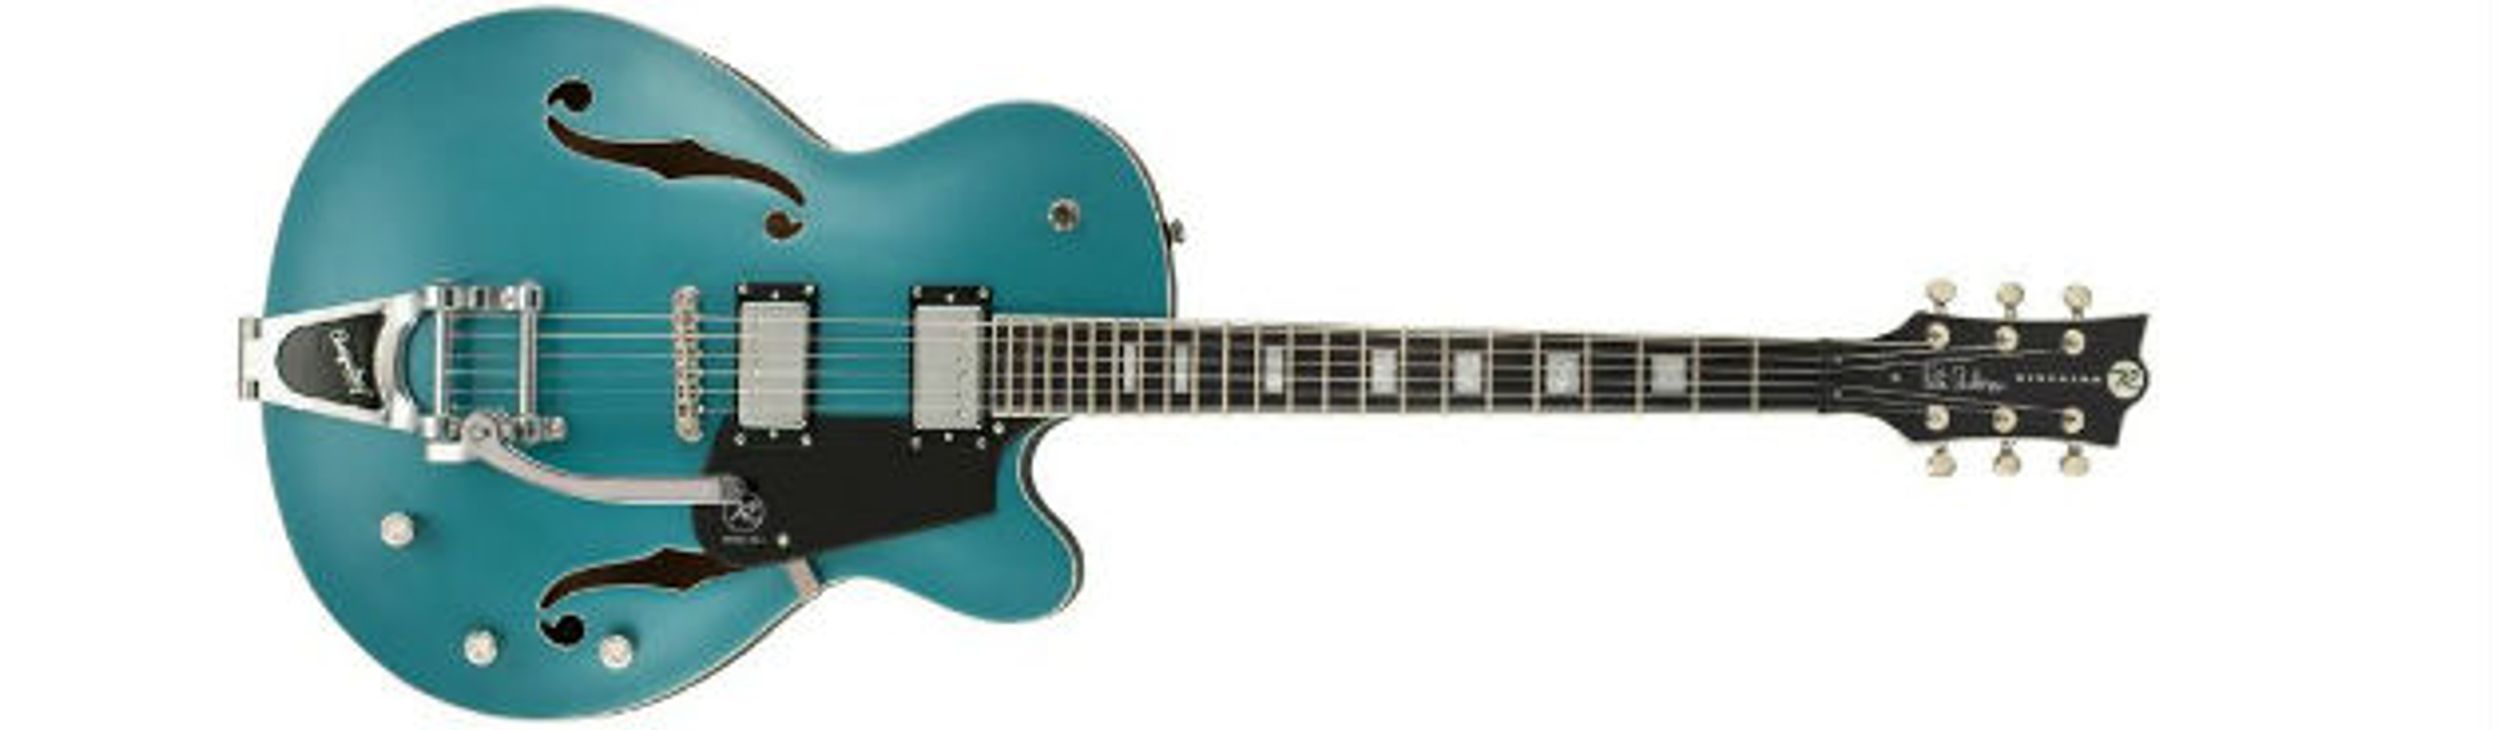 Reverend Announces Upgraded Pete Anderson Models